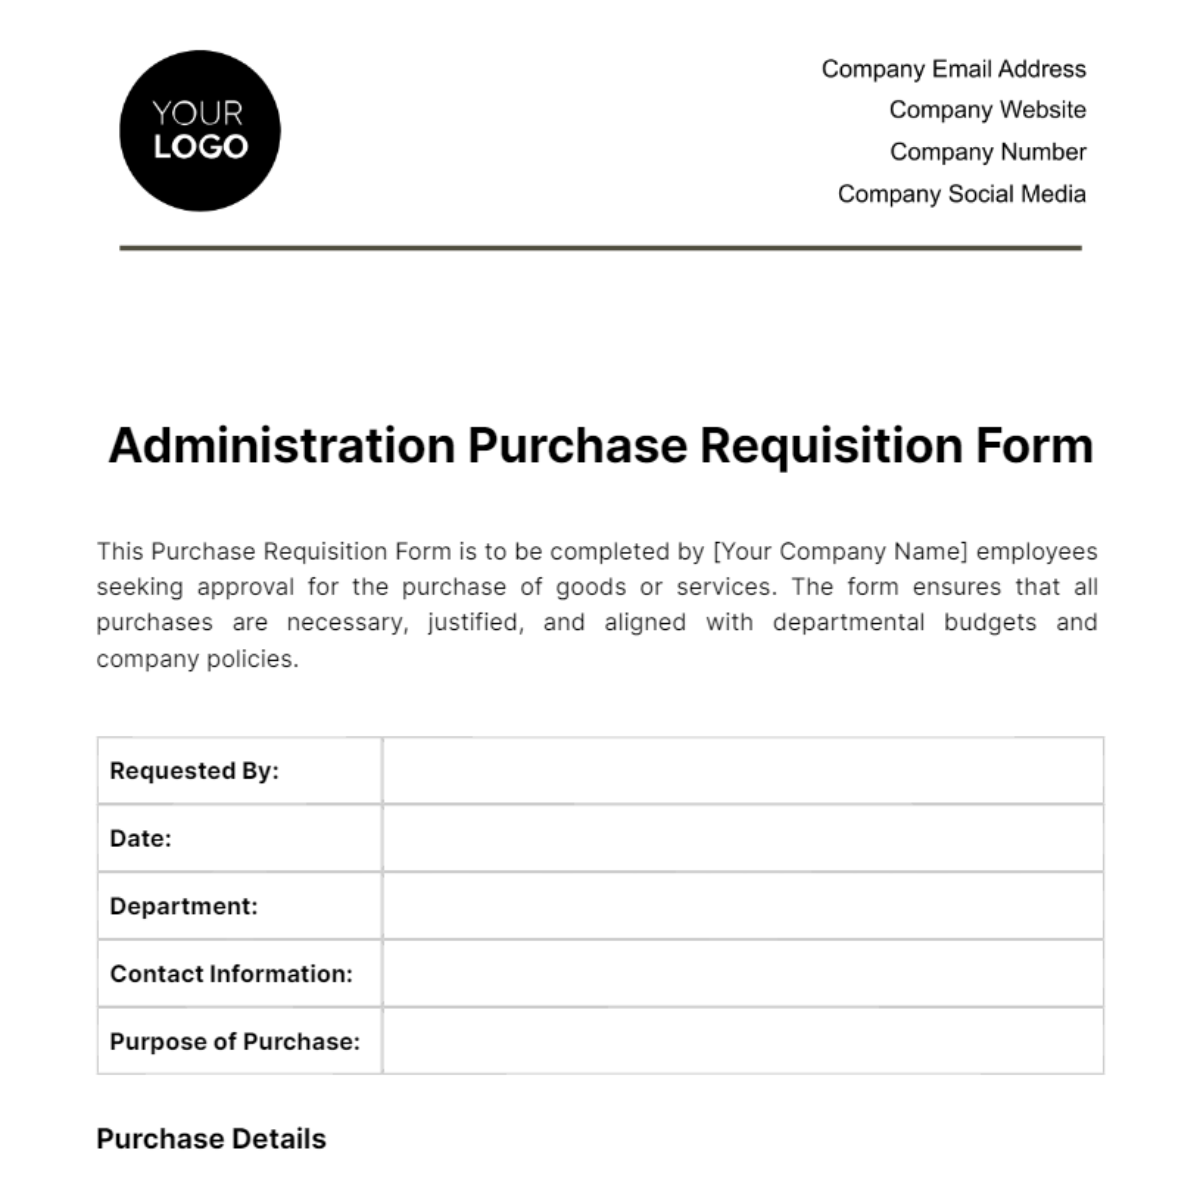 Administration Purchase Requisition Form Template